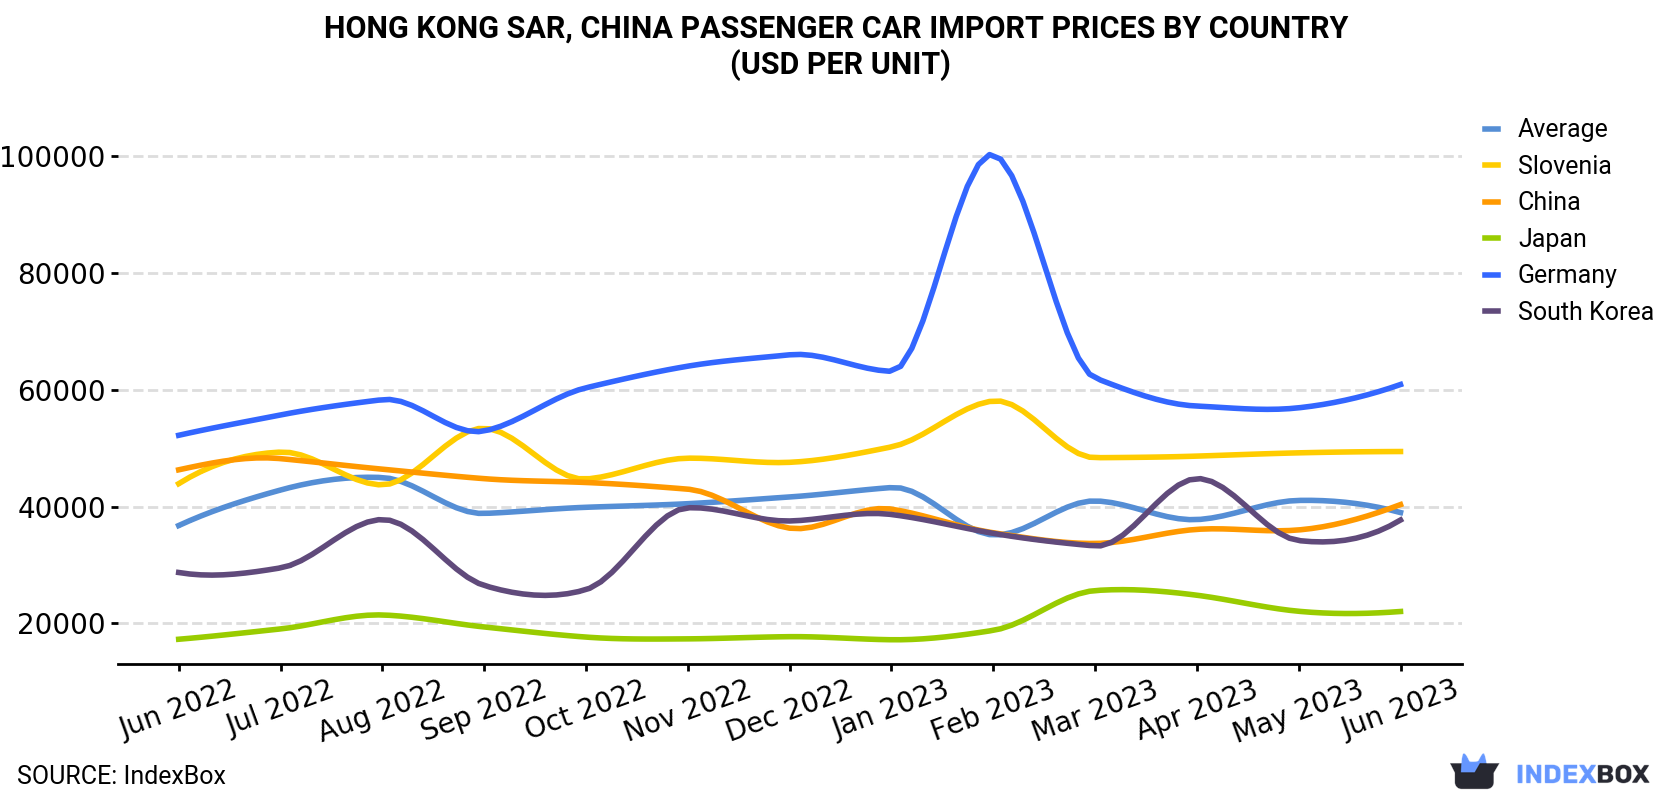 Hong Kong Passenger Car Import Prices By Country (USD Per Unit)